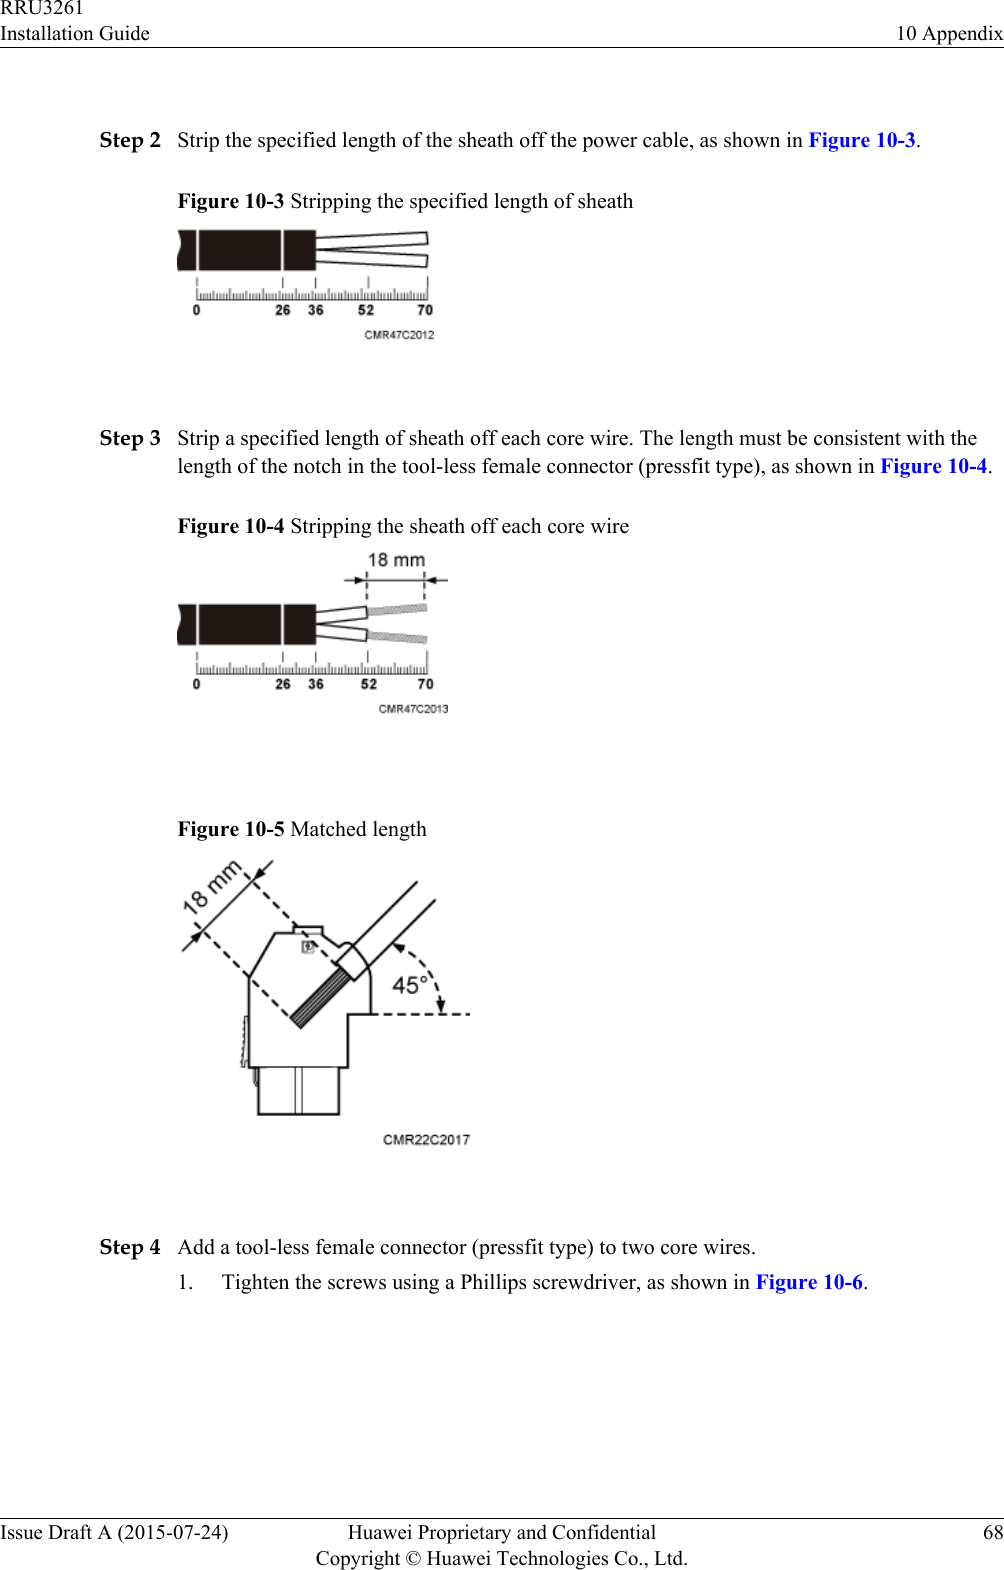  Step 2 Strip the specified length of the sheath off the power cable, as shown in Figure 10-3.Figure 10-3 Stripping the specified length of sheath Step 3 Strip a specified length of sheath off each core wire. The length must be consistent with thelength of the notch in the tool-less female connector (pressfit type), as shown in Figure 10-4.Figure 10-4 Stripping the sheath off each core wire Figure 10-5 Matched length Step 4 Add a tool-less female connector (pressfit type) to two core wires.1. Tighten the screws using a Phillips screwdriver, as shown in Figure 10-6.RRU3261Installation Guide 10 AppendixIssue Draft A (2015-07-24) Huawei Proprietary and ConfidentialCopyright © Huawei Technologies Co., Ltd.68